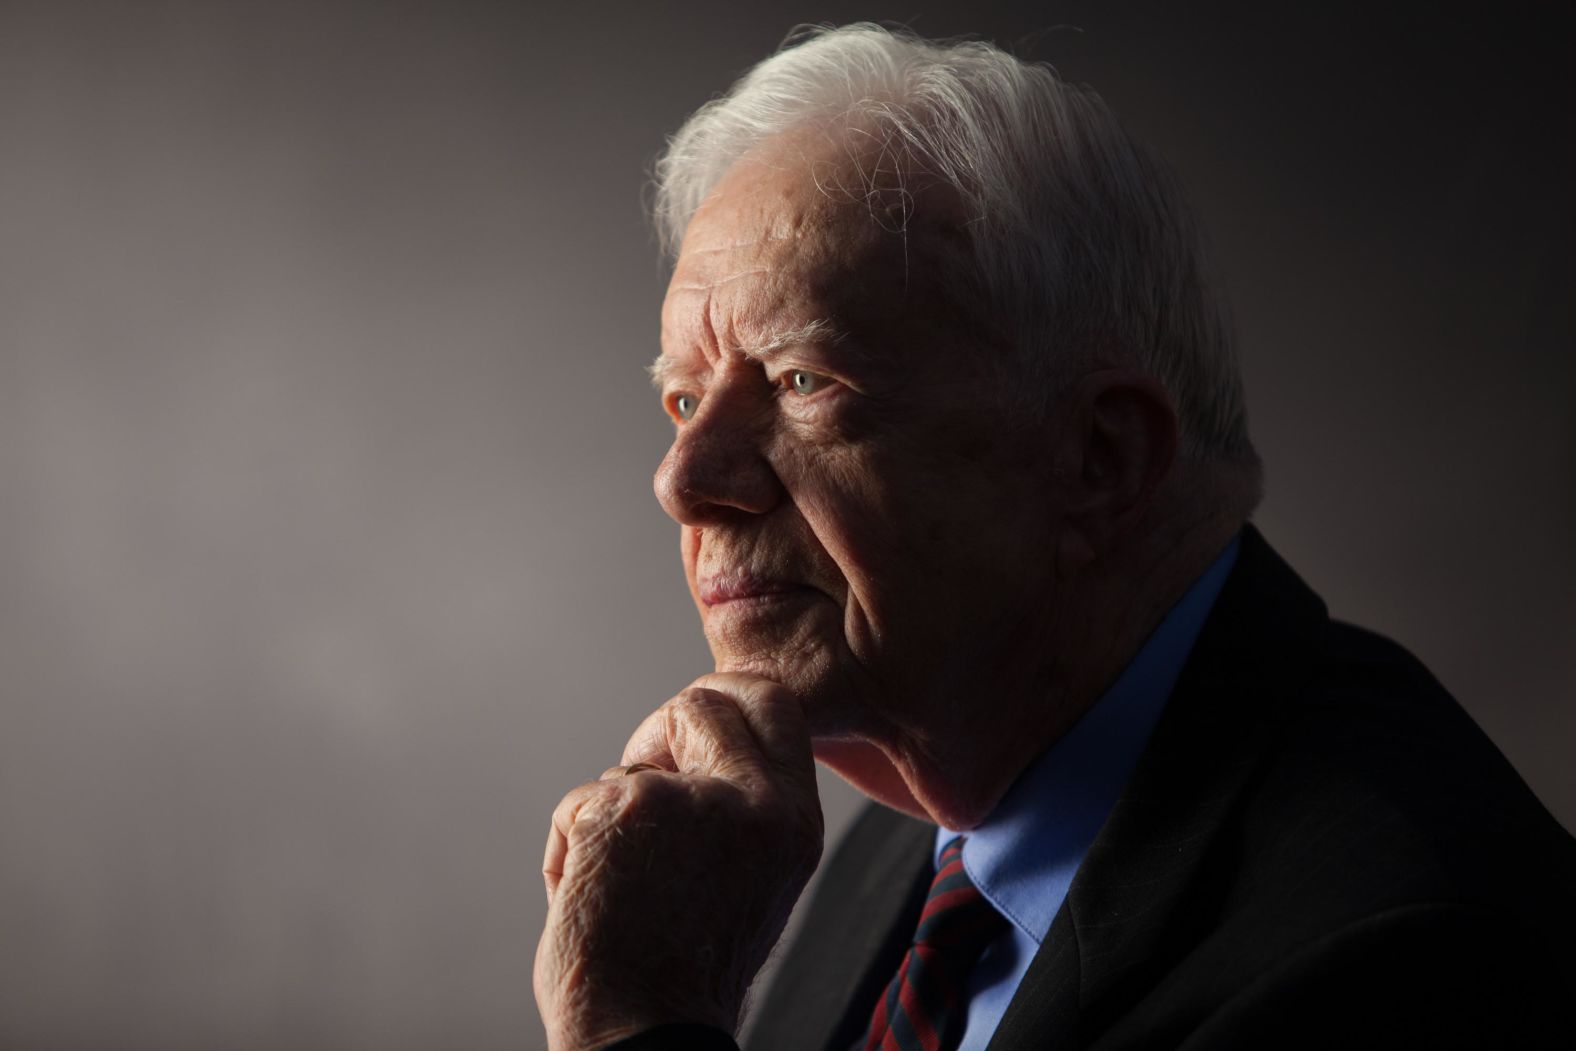 Carter was interviewed for "The Presidents' Gatekeepers" project at the Carter Center in Atlanta in September 2011. 